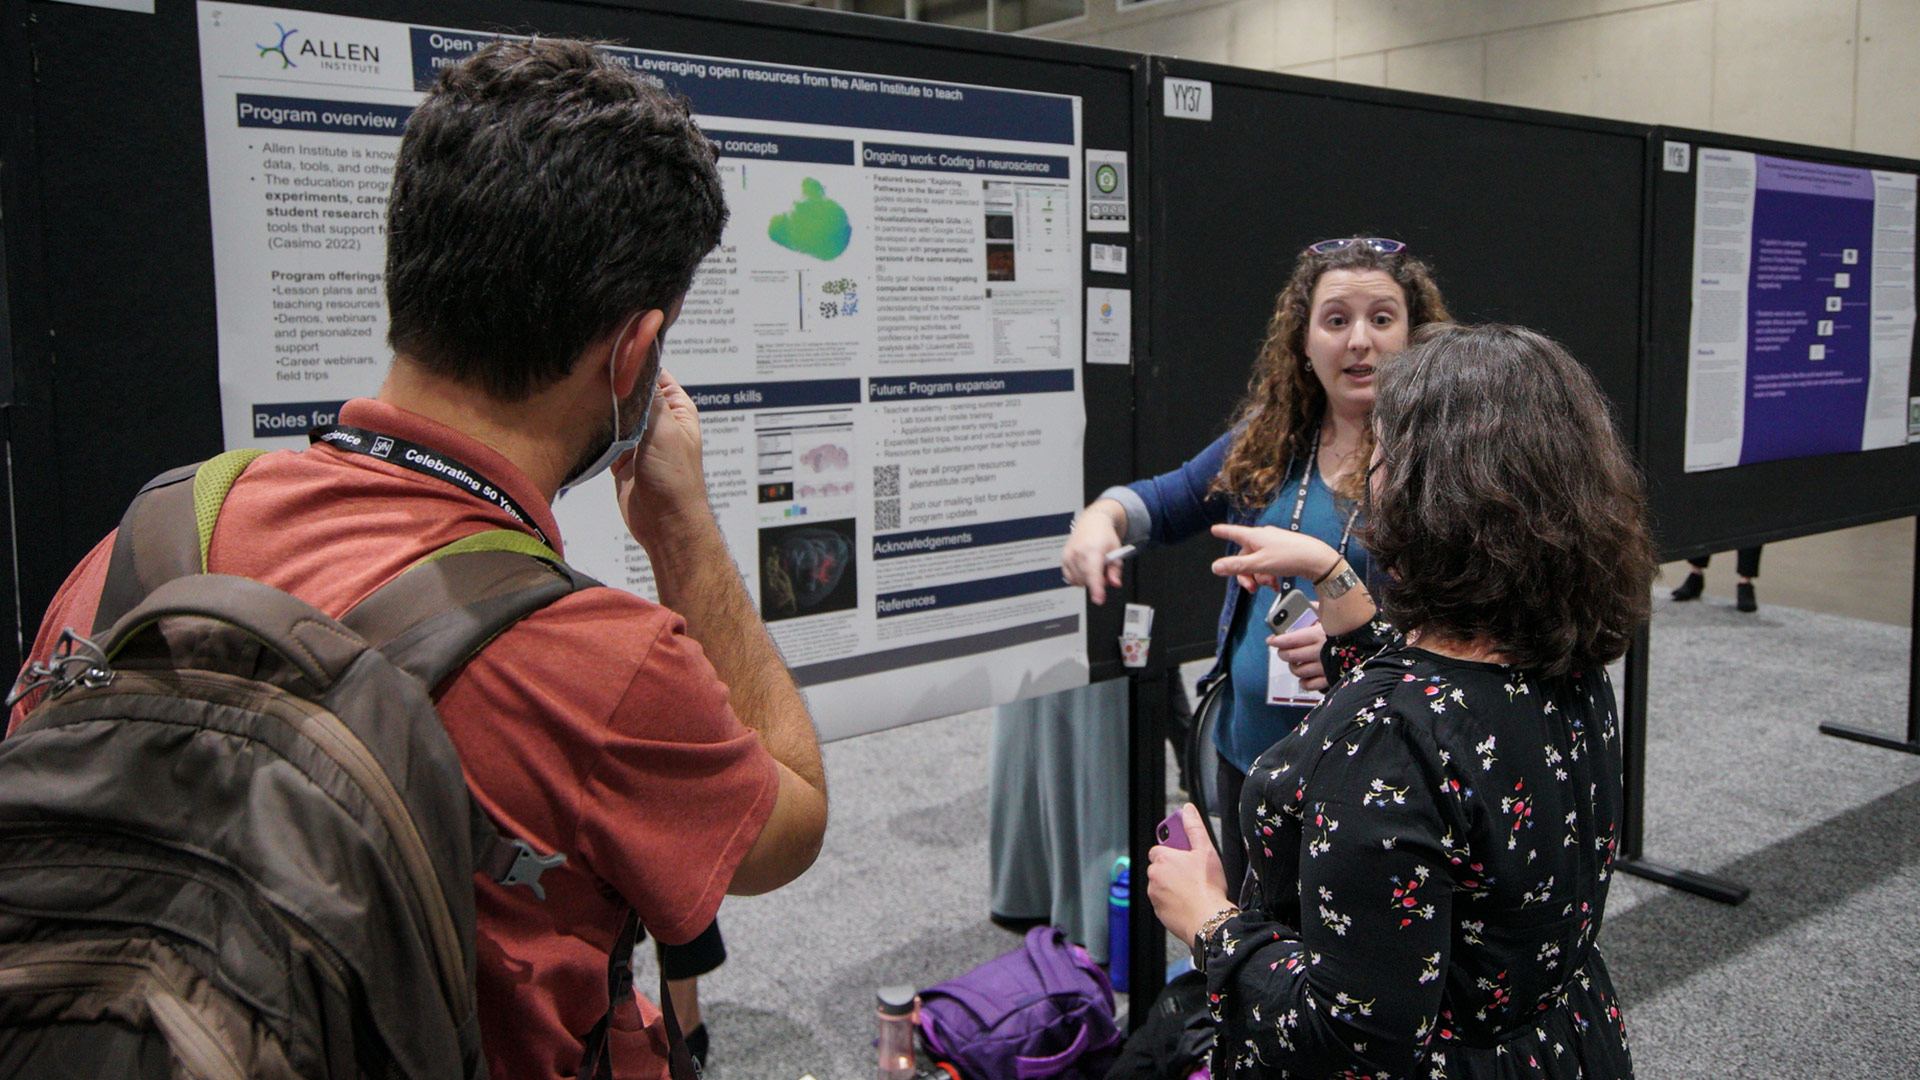 Kaitlyn Casimo speaking to attendees at SfN 2022 poster session